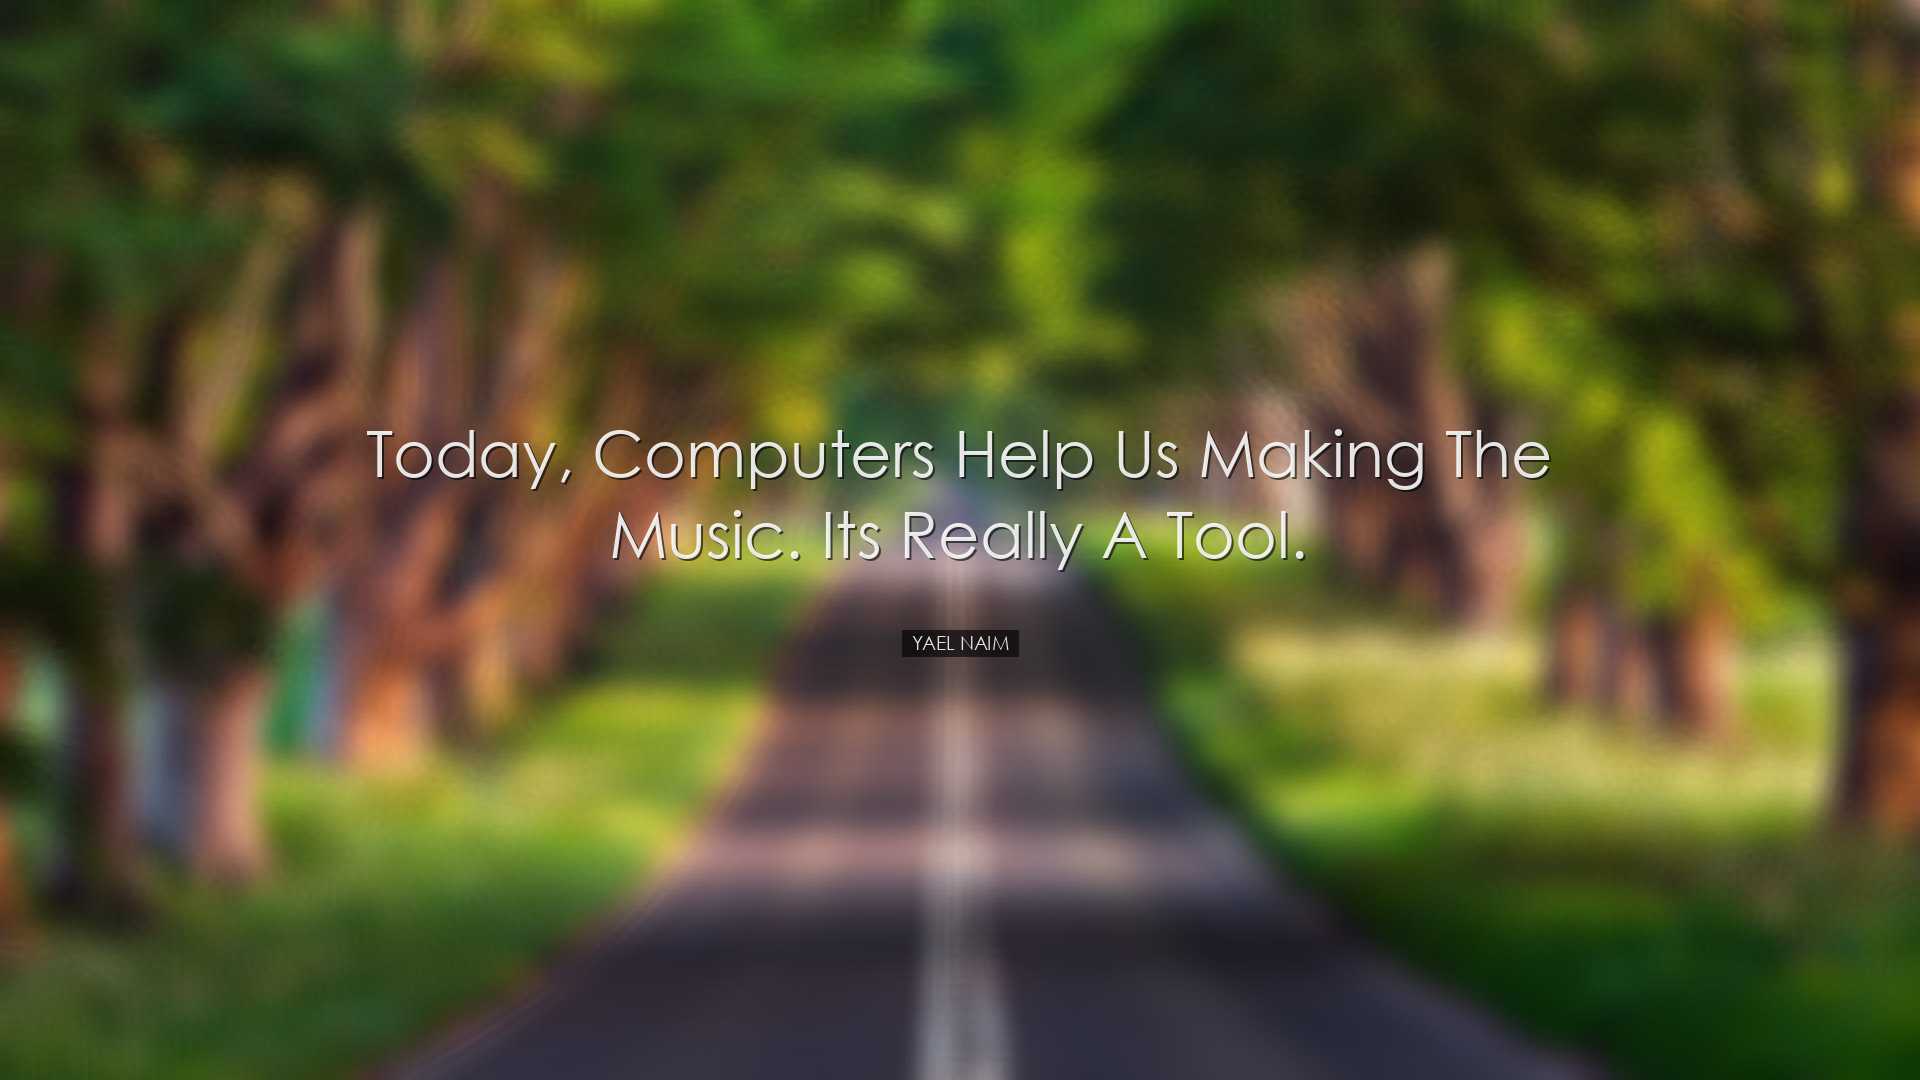 Today, computers help us making the music. Its really a tool. - Ya